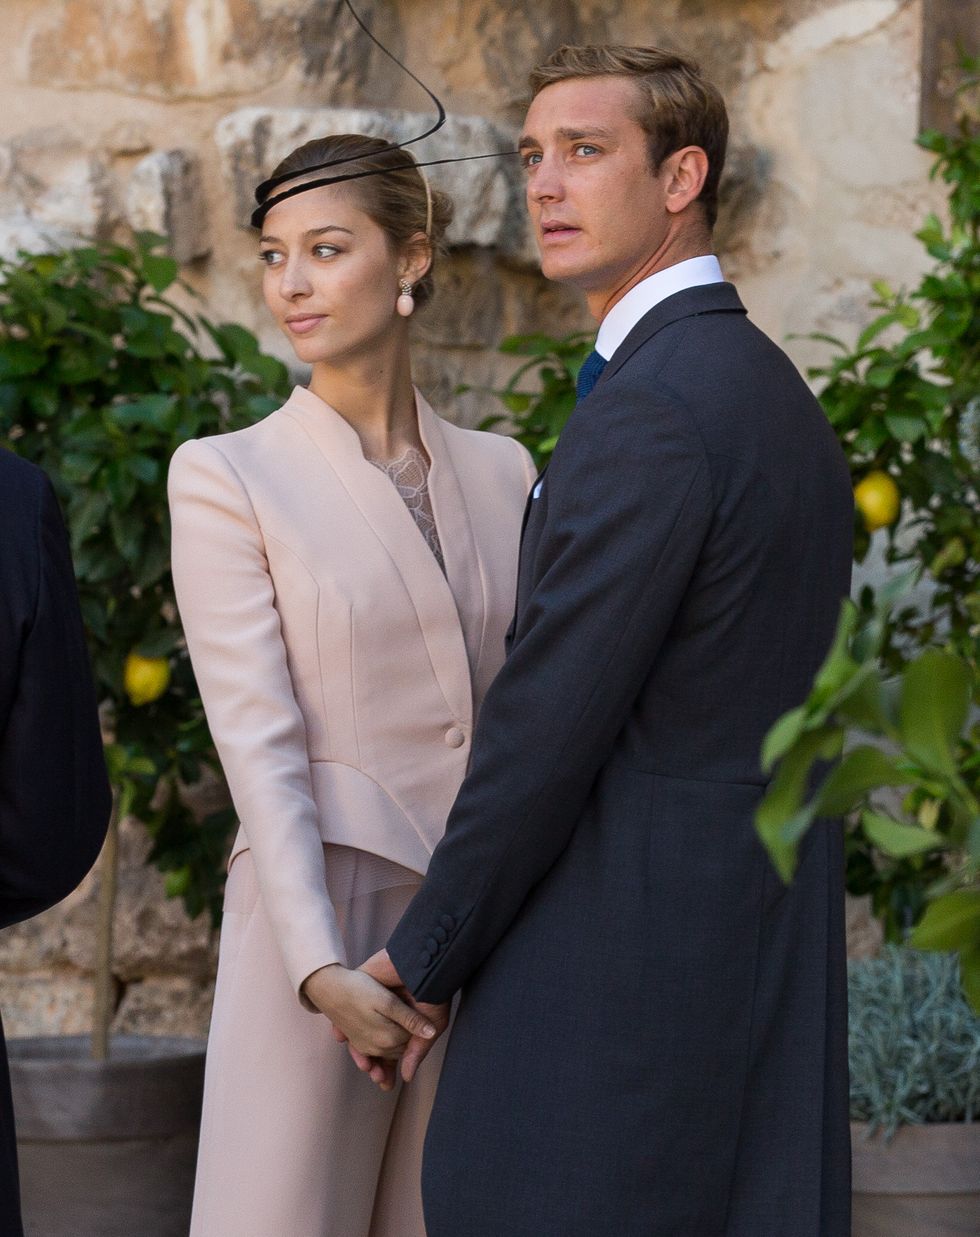 Religious Wedding Of Prince Felix Of Luxembourg & Claire Lademacher